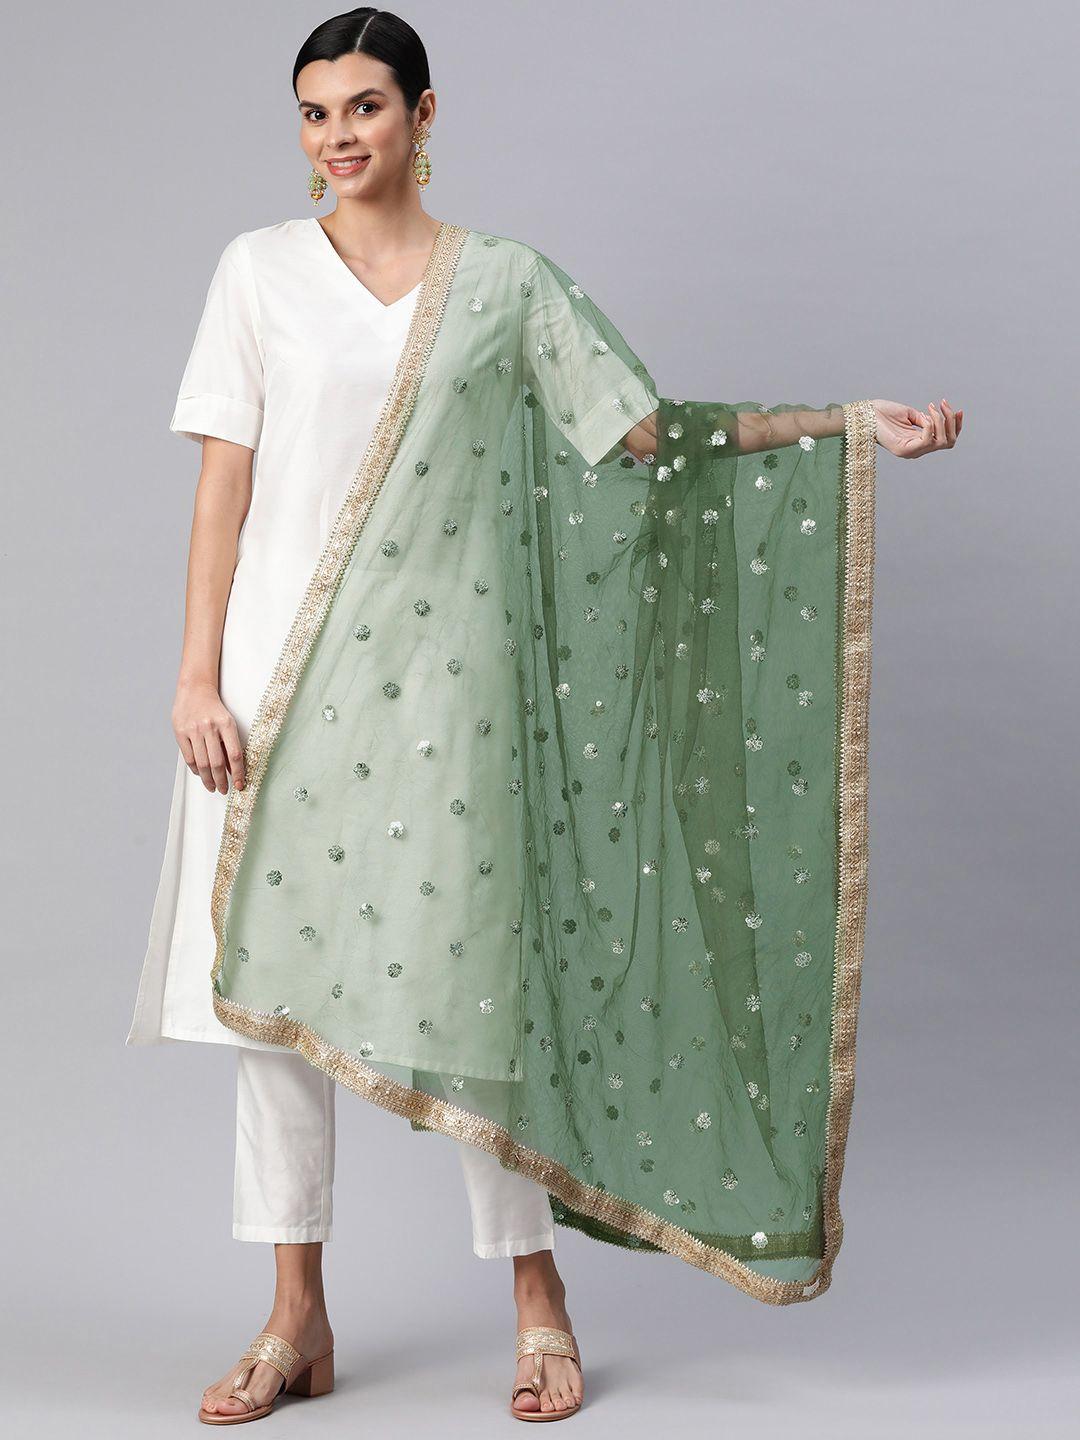 rang gali embroidered dupatta with sequinned